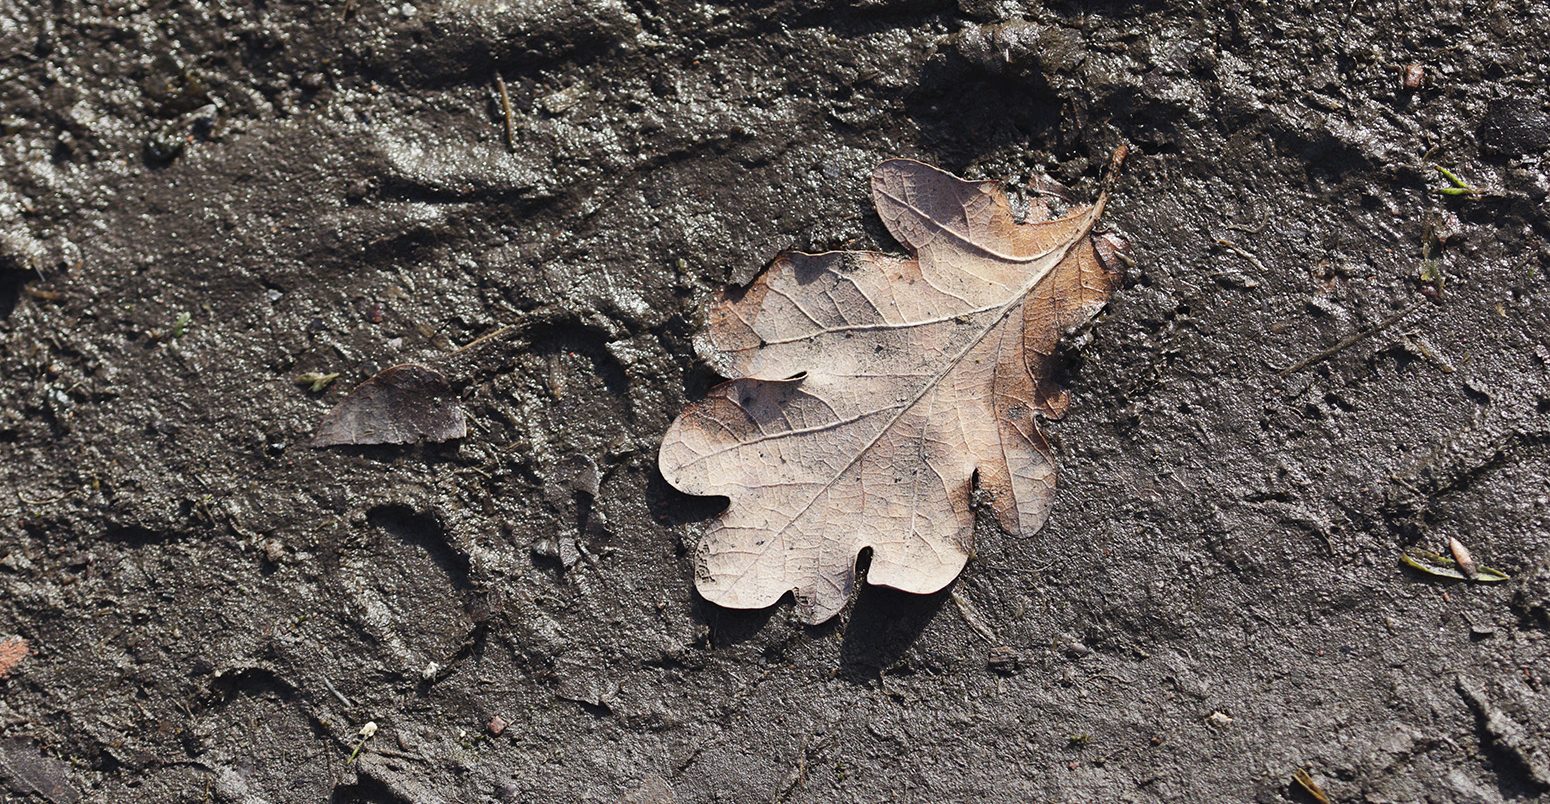 Typical of wet country paths in winter, this one bears the imprint of recent passing traffic. A dead oak leaf has been blown onto the dark, sodden, muddy path, where its outline is highlighted.